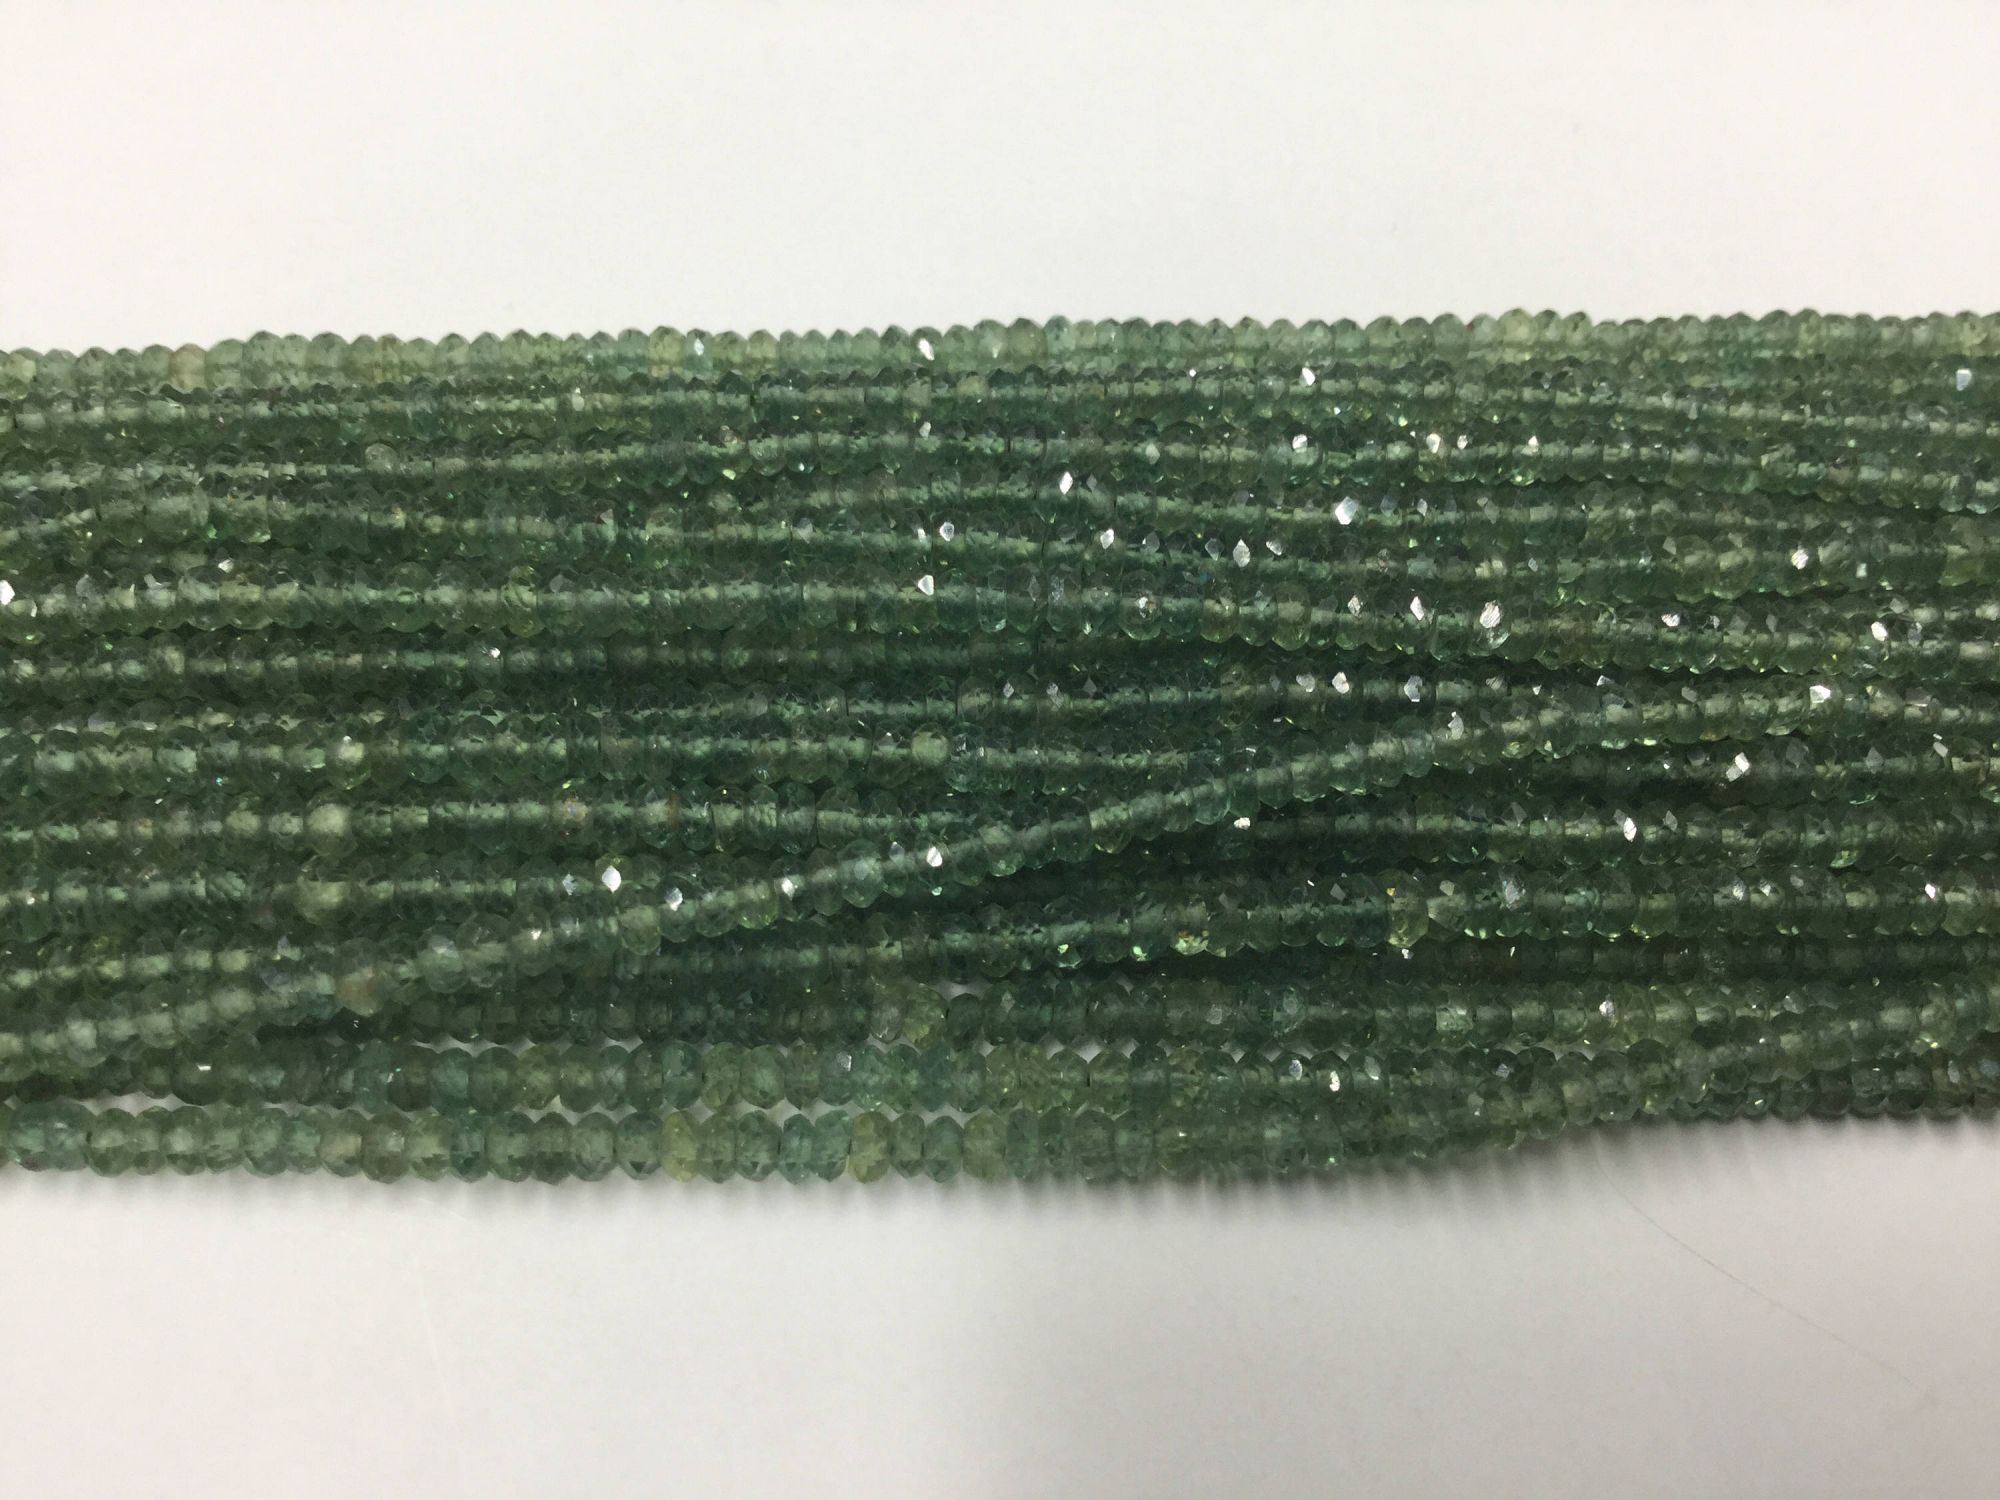 Green Apatite Rondelles Faceted